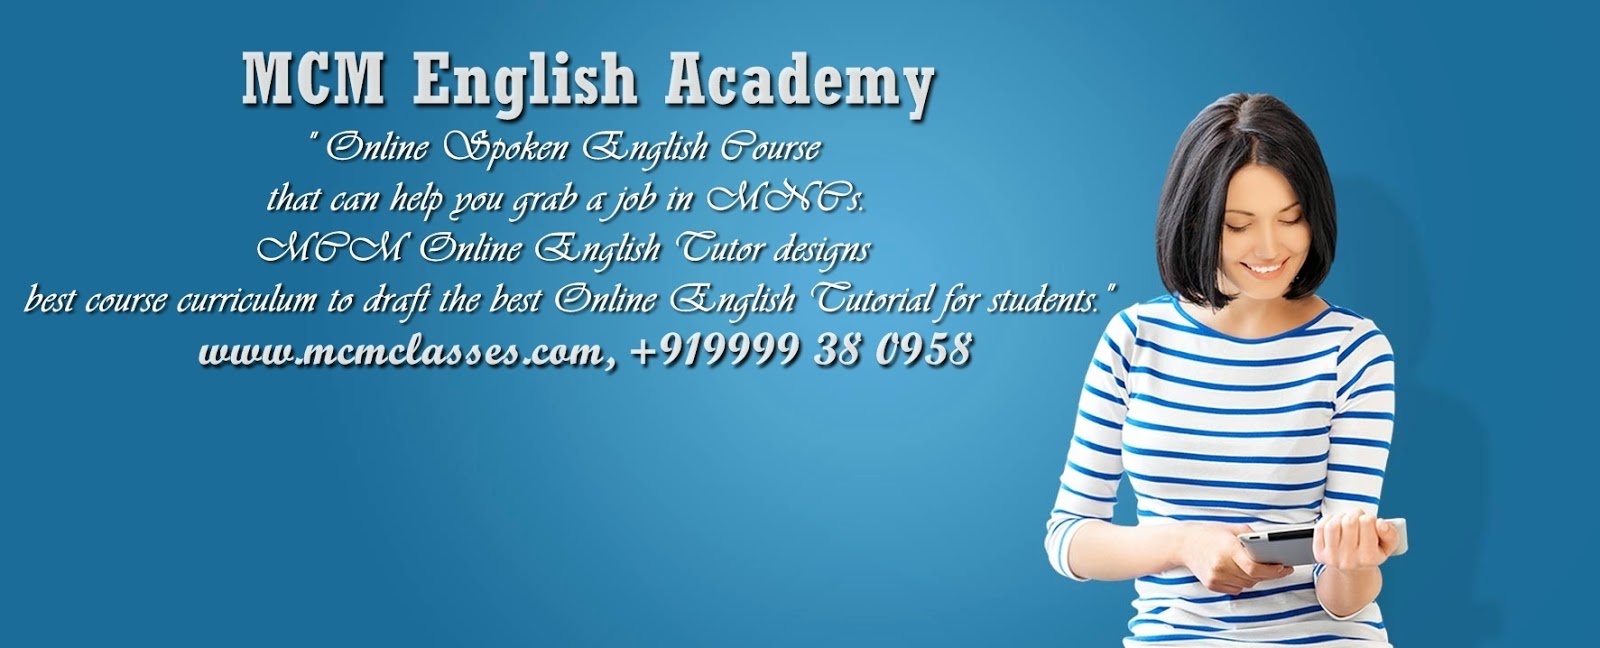 Where can you find online English courses?